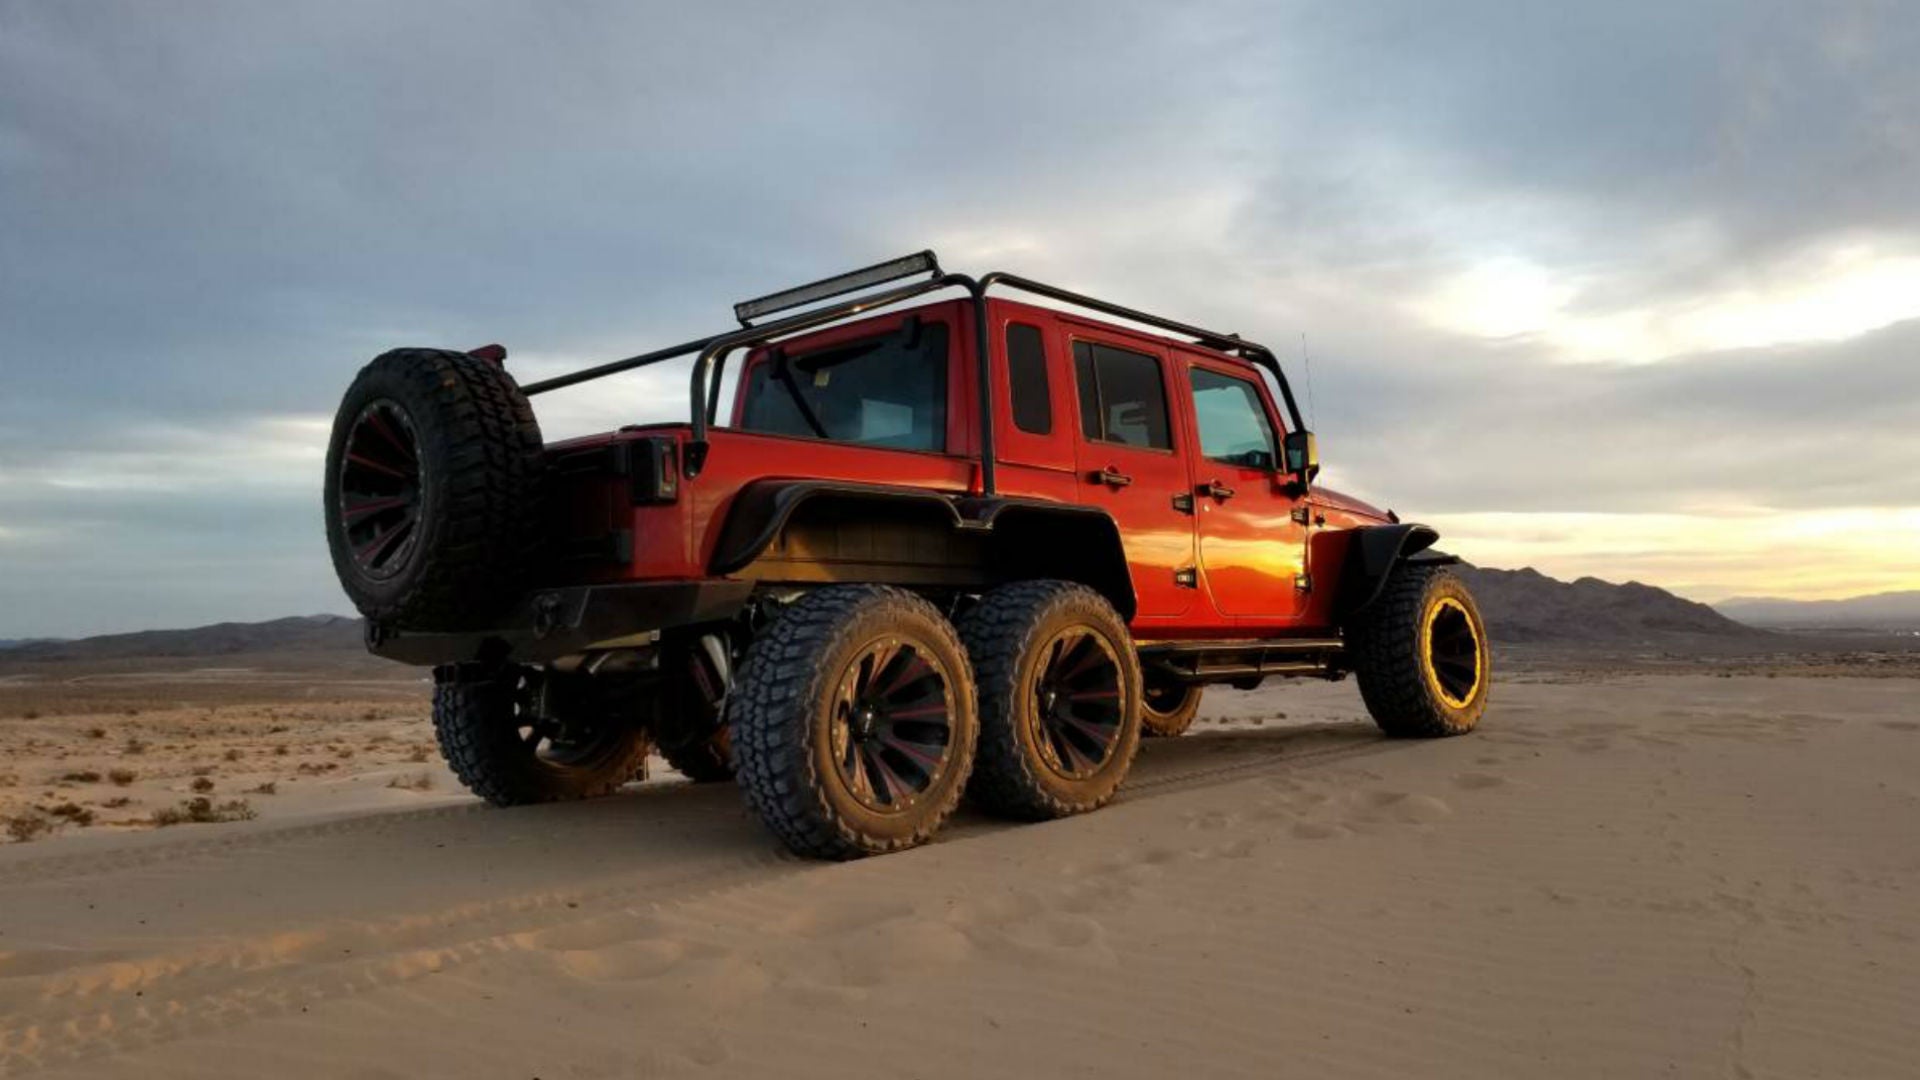 You Can Buy This Hellcat-Powered Jeep Wrangler 6x6 Pickup for Just $290K